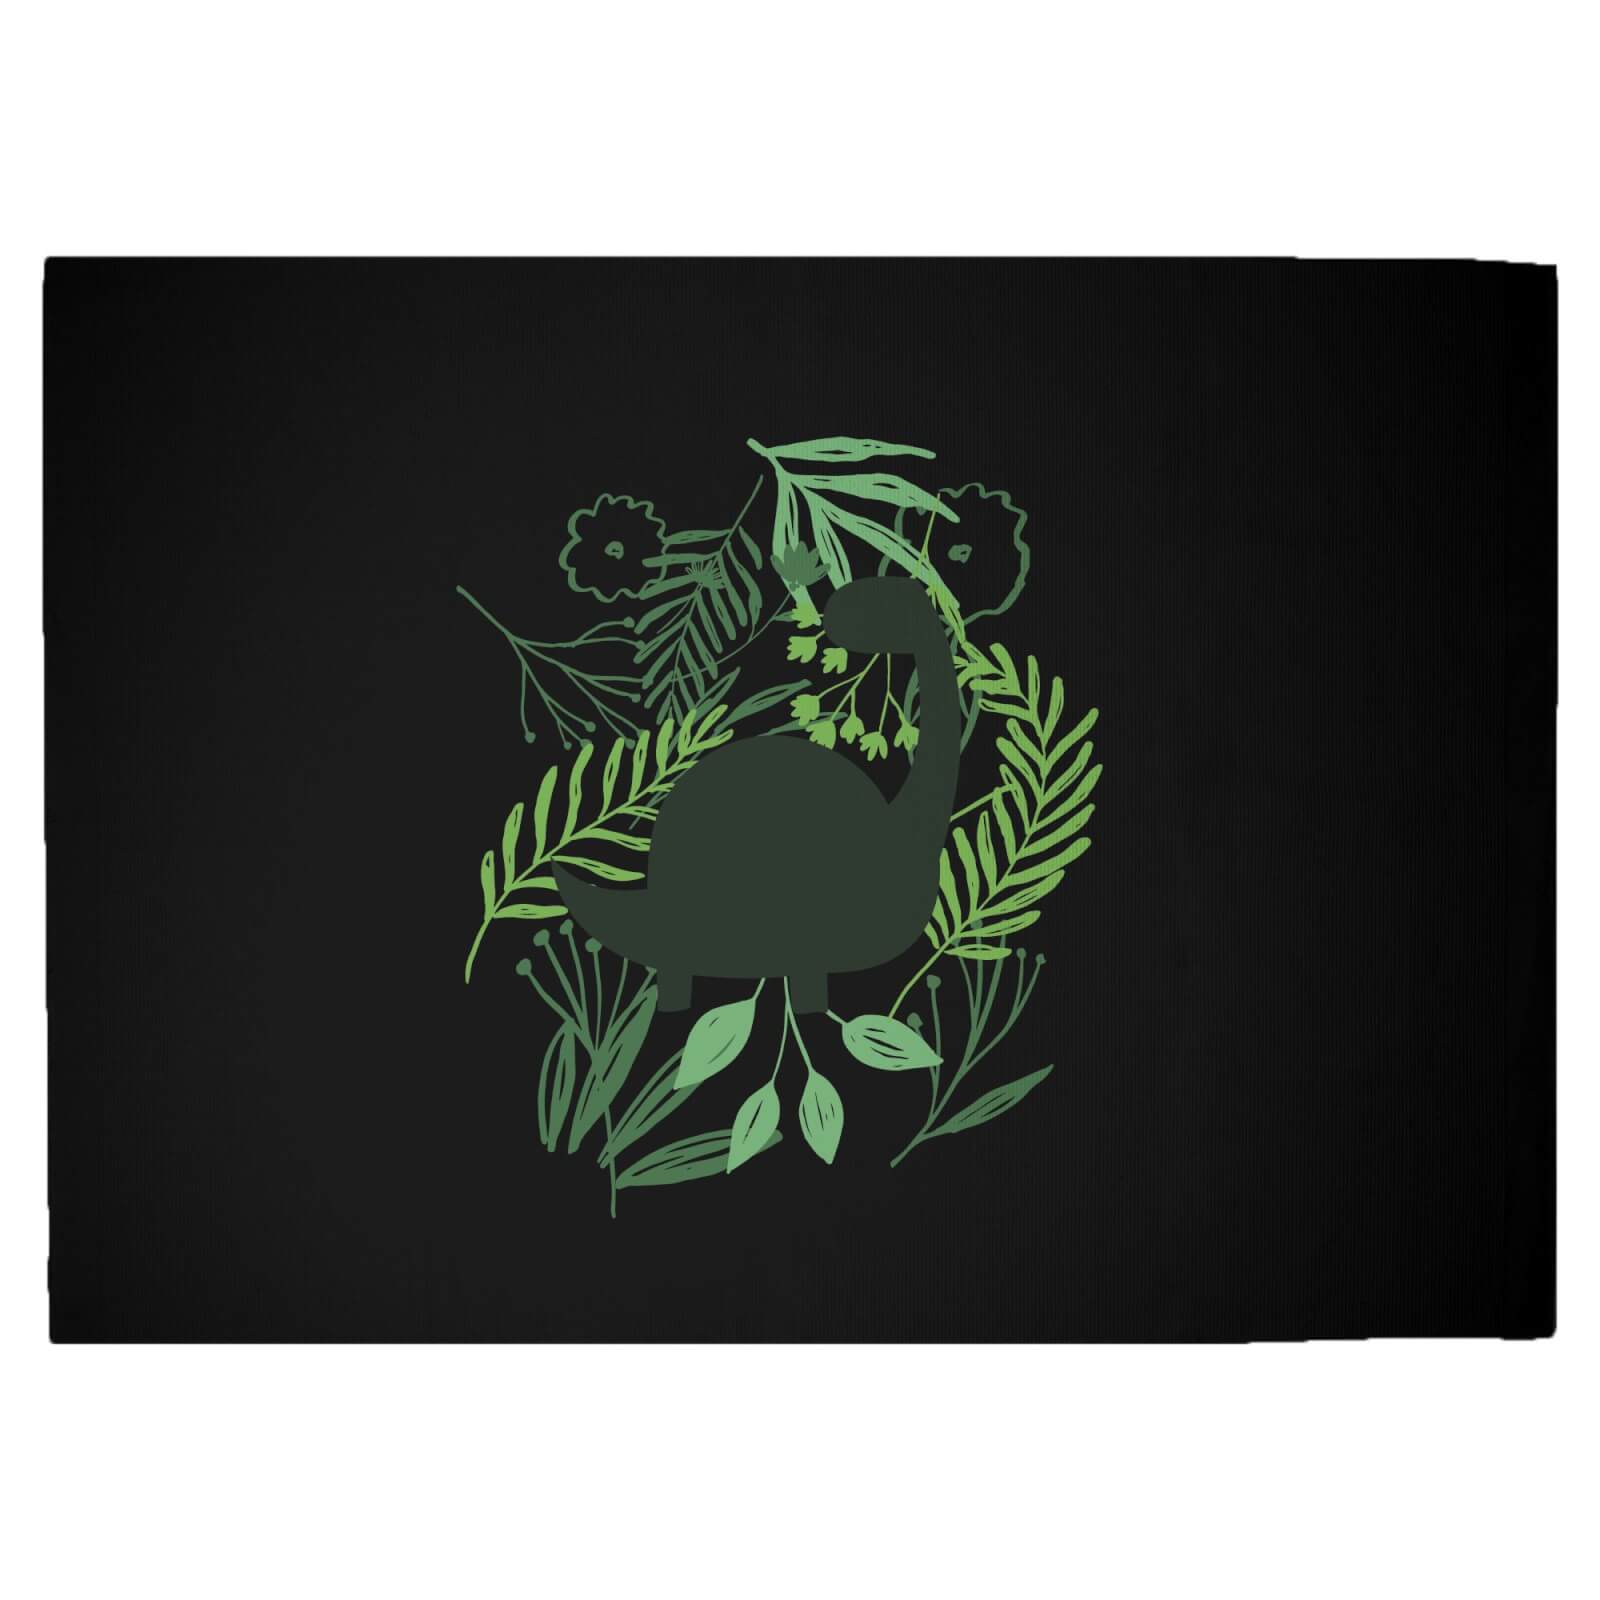 Diplodocus Silhouette Foliage Woven Rug - Large